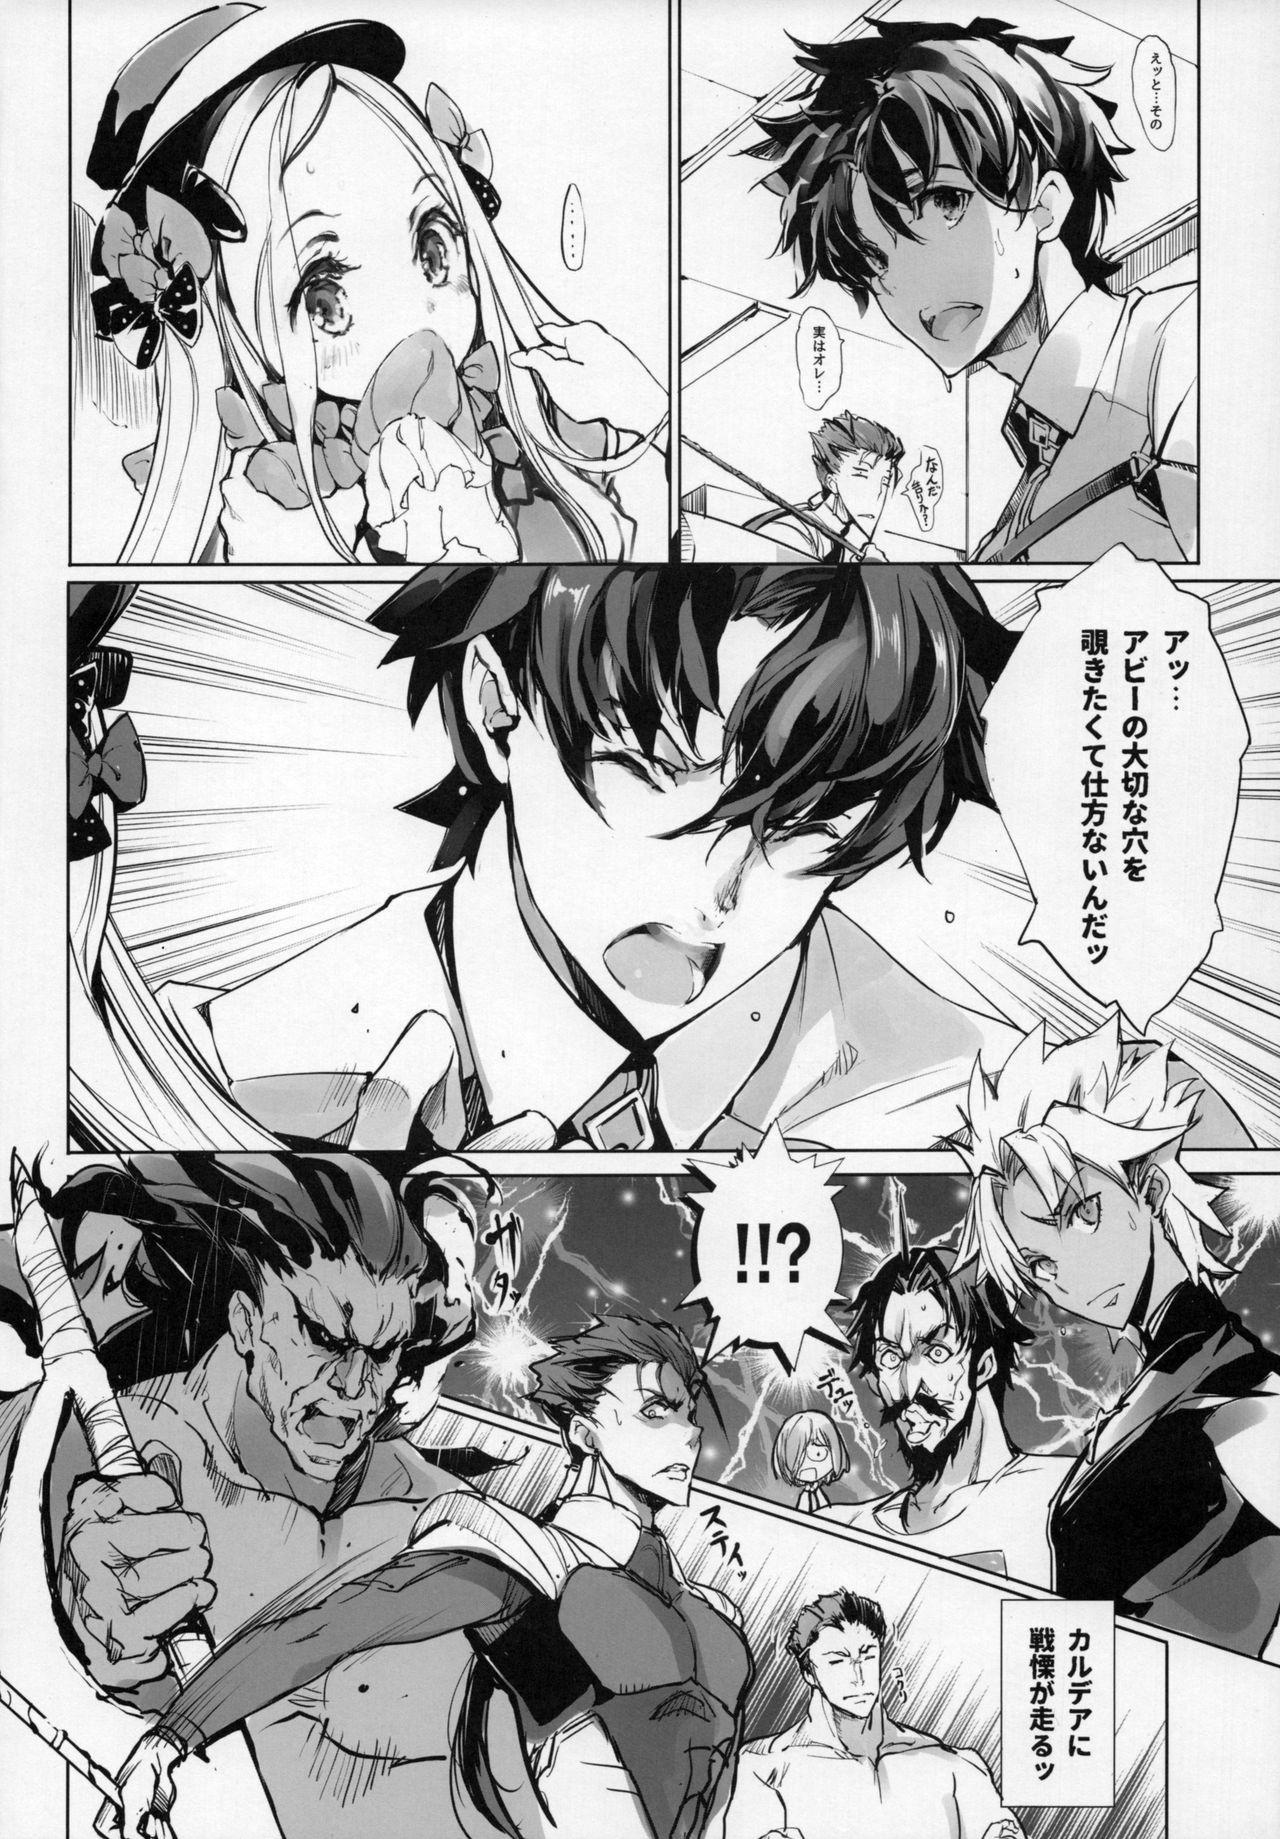 Asslick Sen no Ko o Haramu Mori no Shoujo - The girl of the woods with a thousand young - Fate grand order Real Sex - Page 7